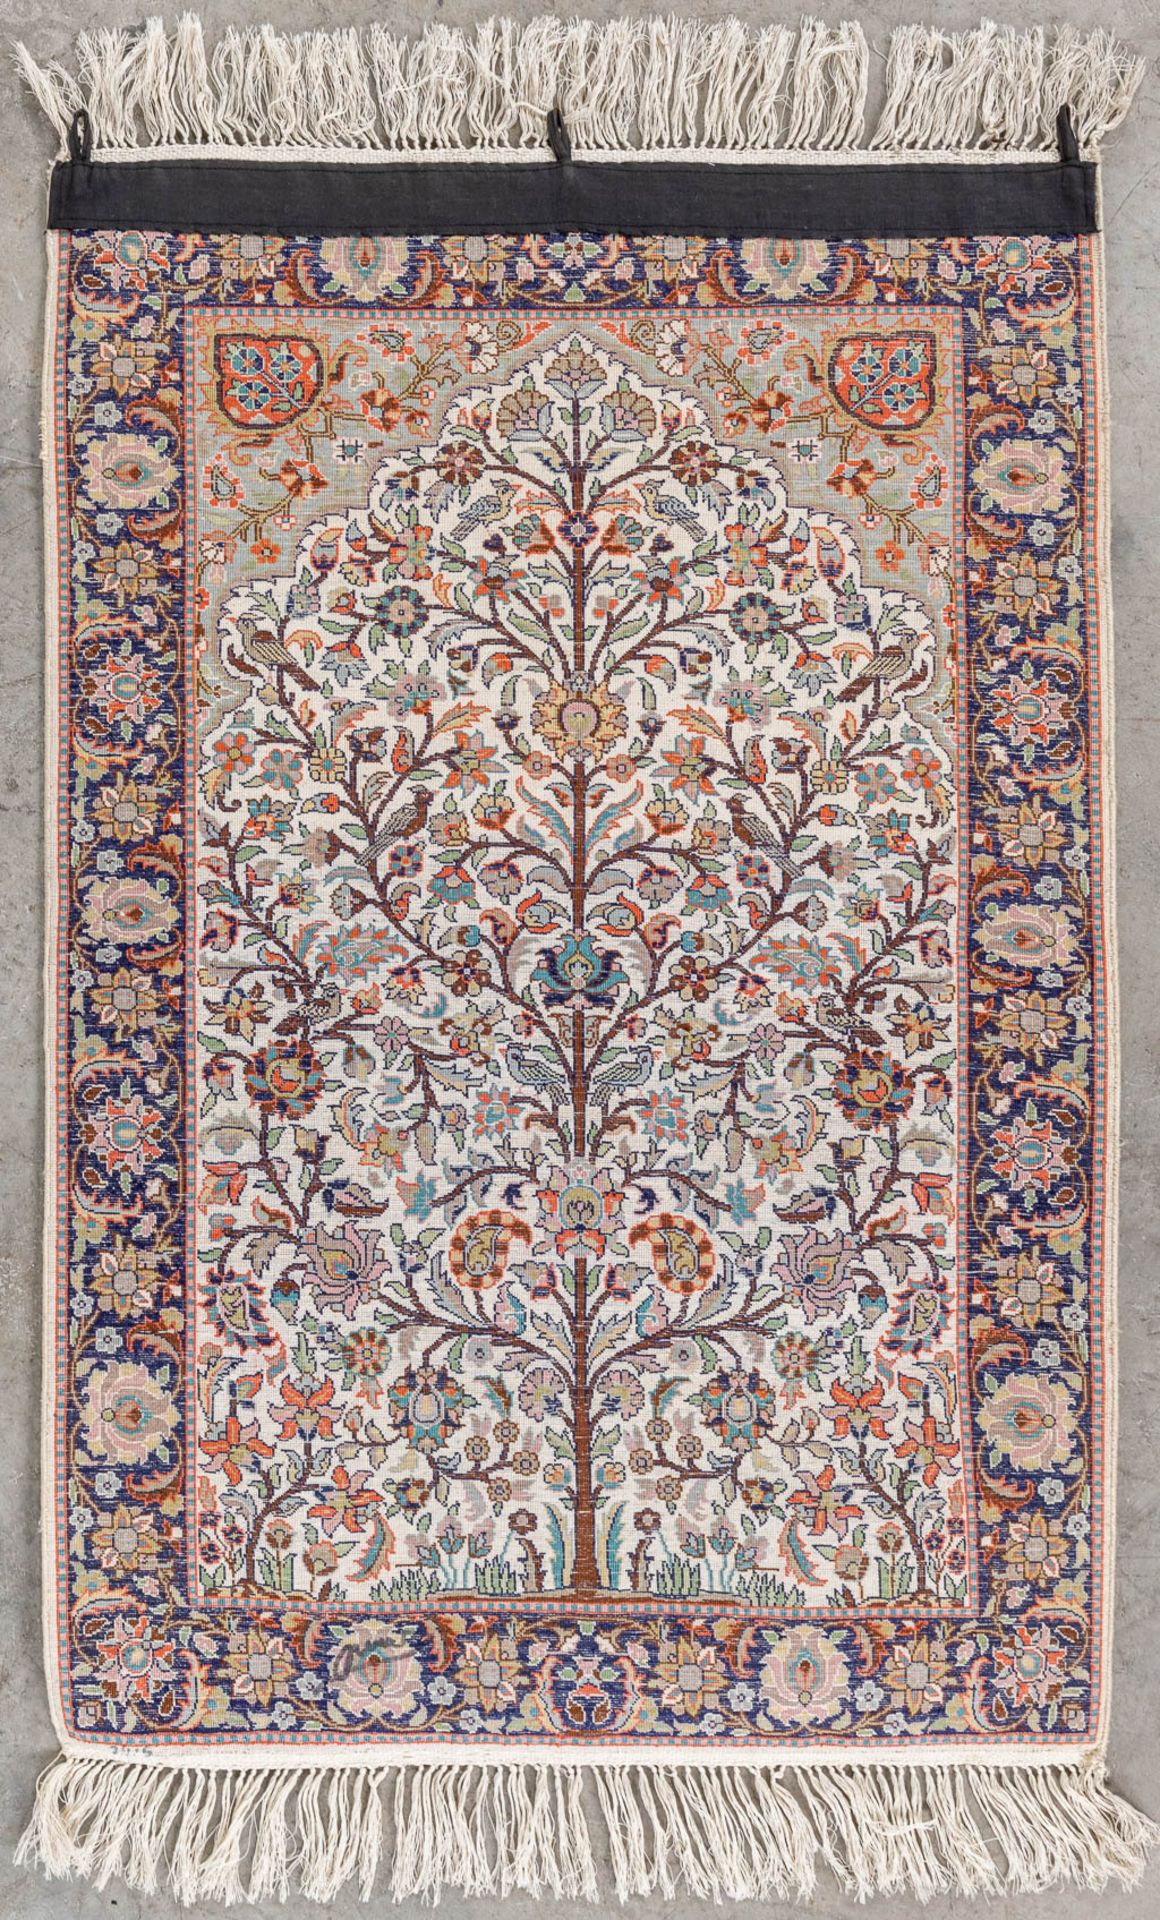 An oriental hand-made carpet made of silk, 'Tree Of Life', Kashmir. (L:60 x W:90 cm) - Image 5 of 6